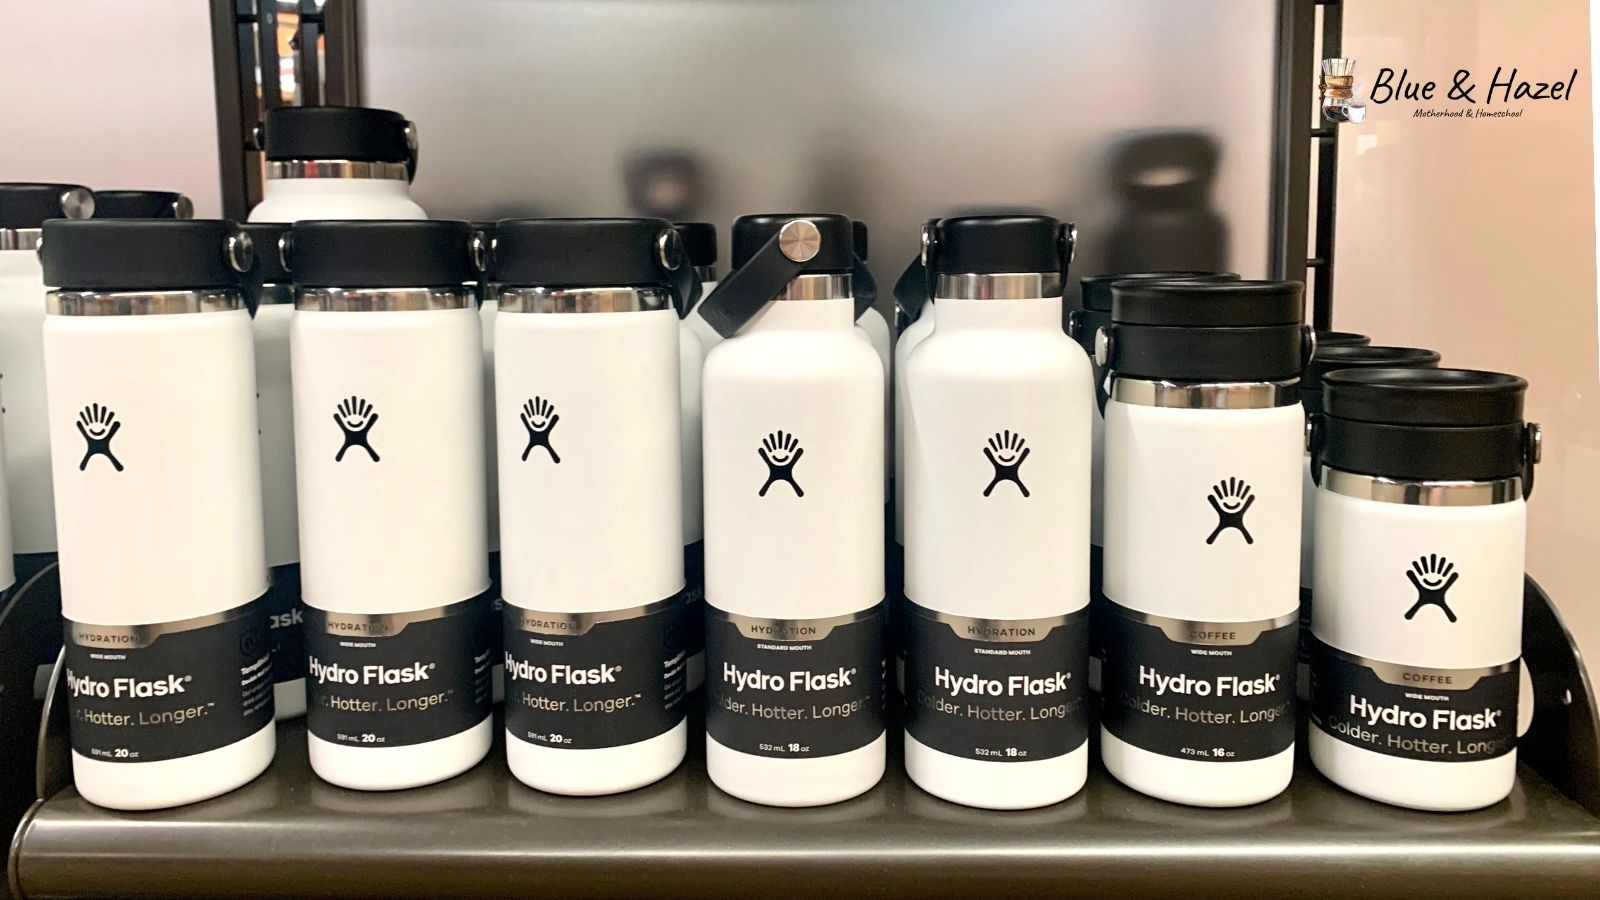 https://blueandhazel.com/wp-content/uploads/2022/05/How-to-buy-Hydro-Flask-for-25-to-50-off.jpg